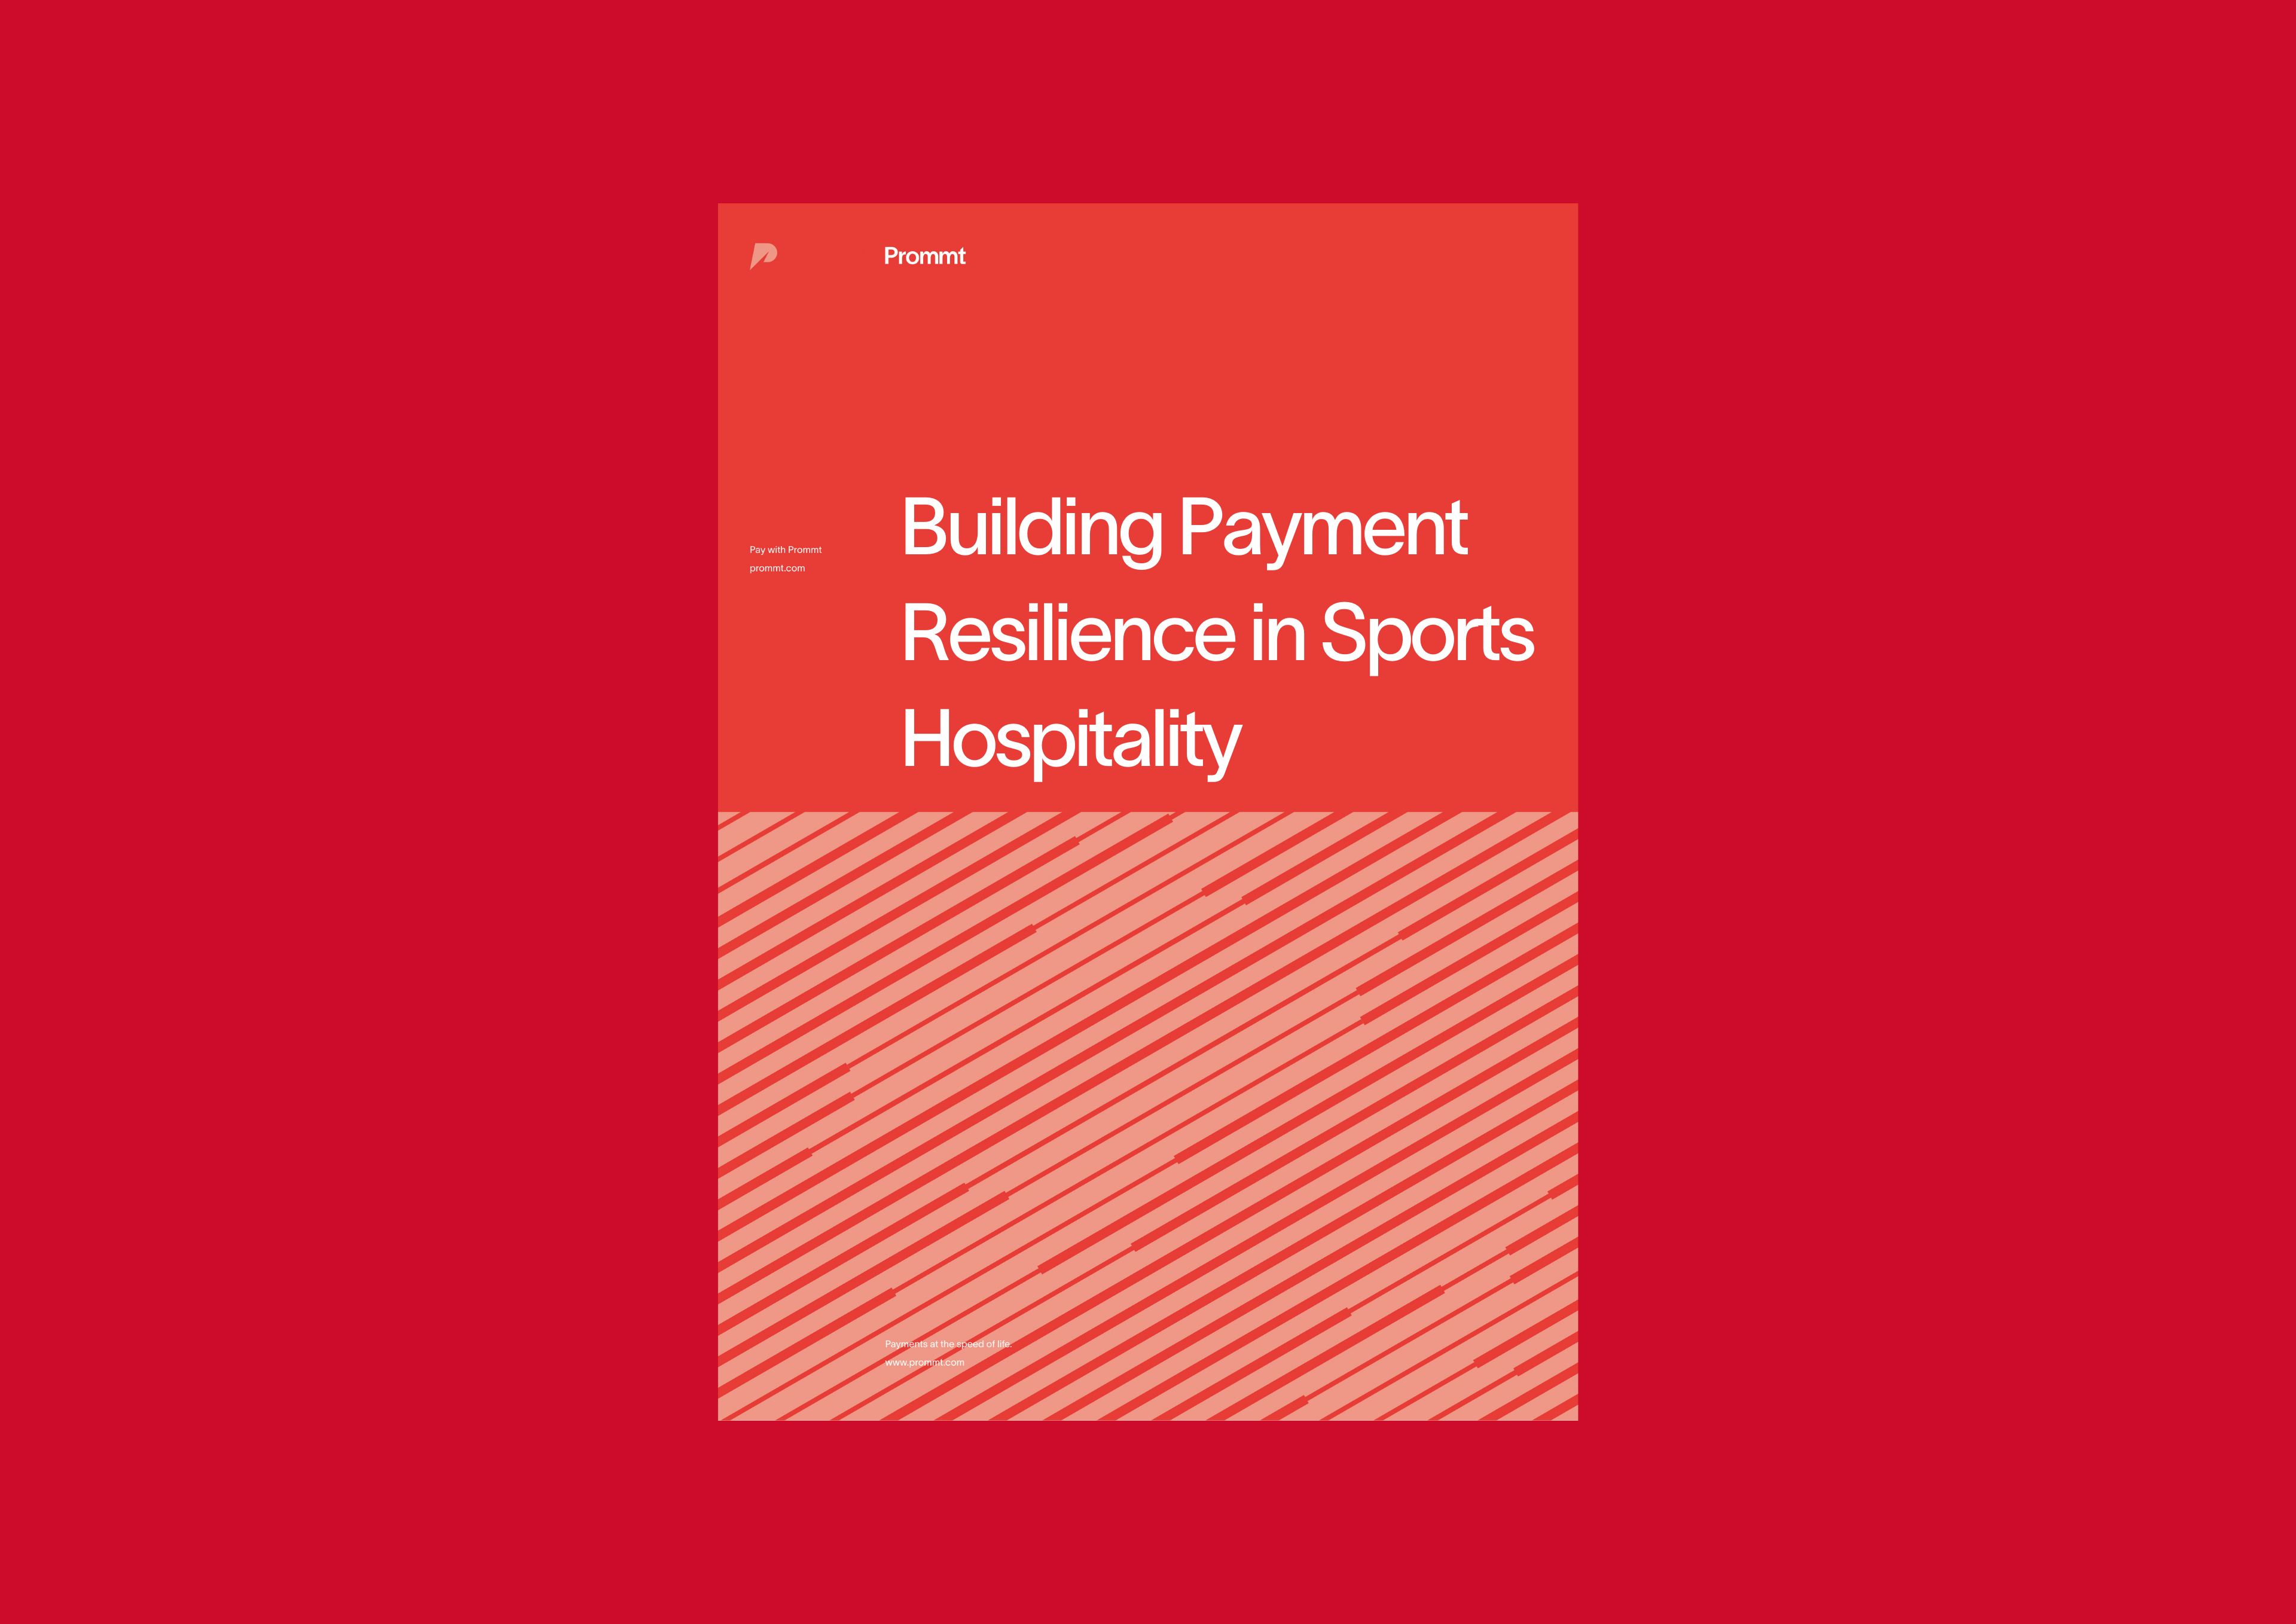 Building Payment Resilience in Sports Hospitality